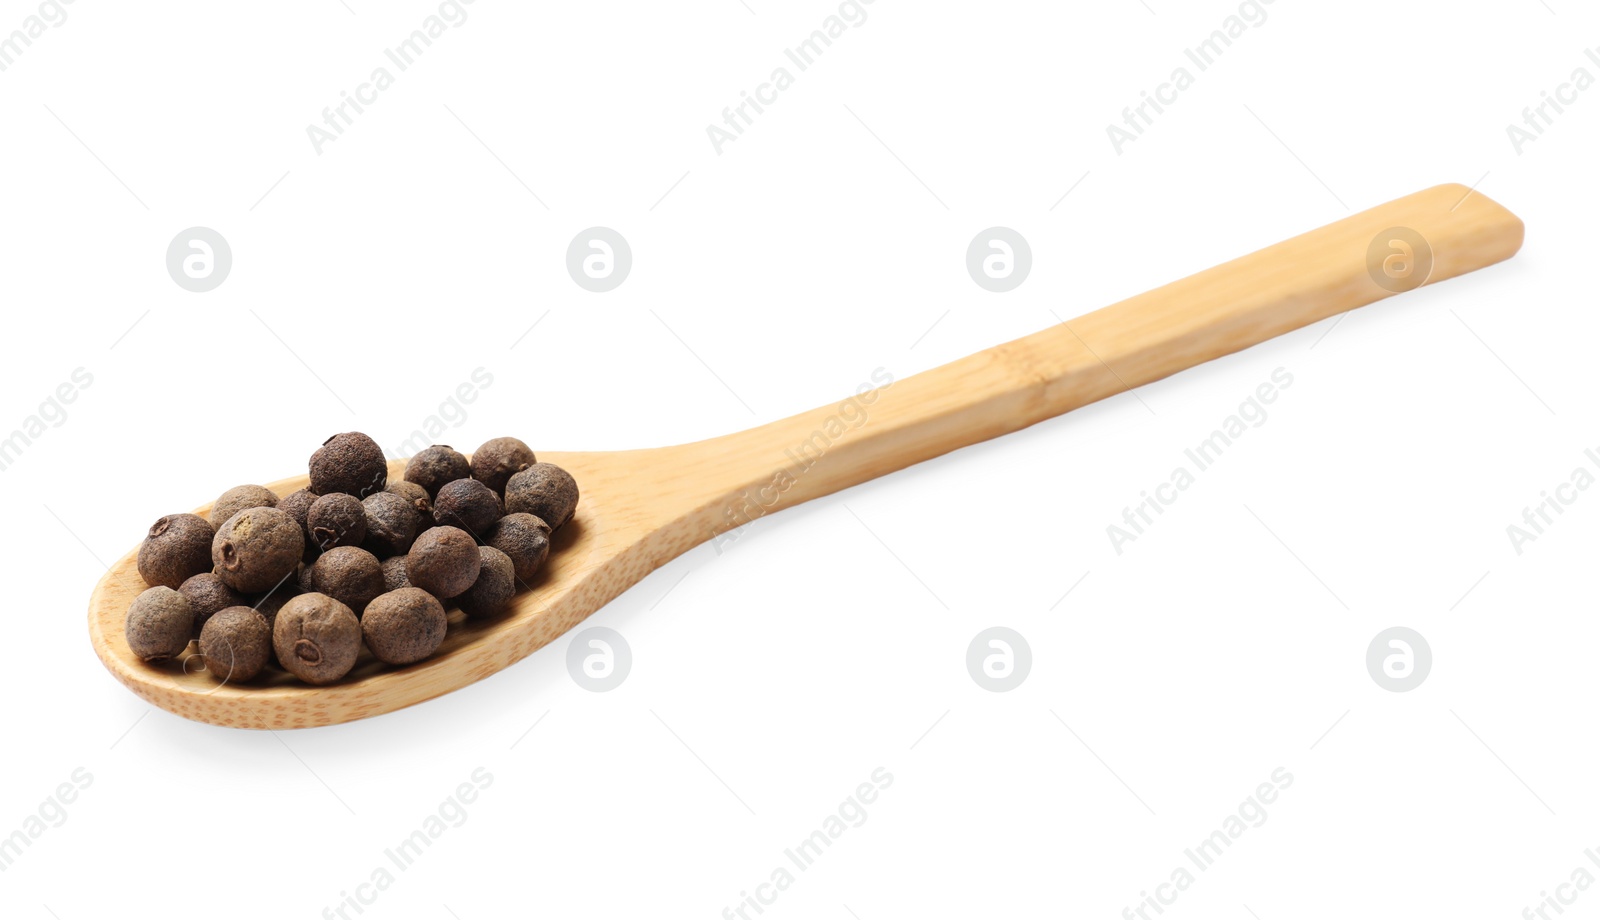 Photo of Dry allspice berries (Jamaica pepper) in spoon isolated on white